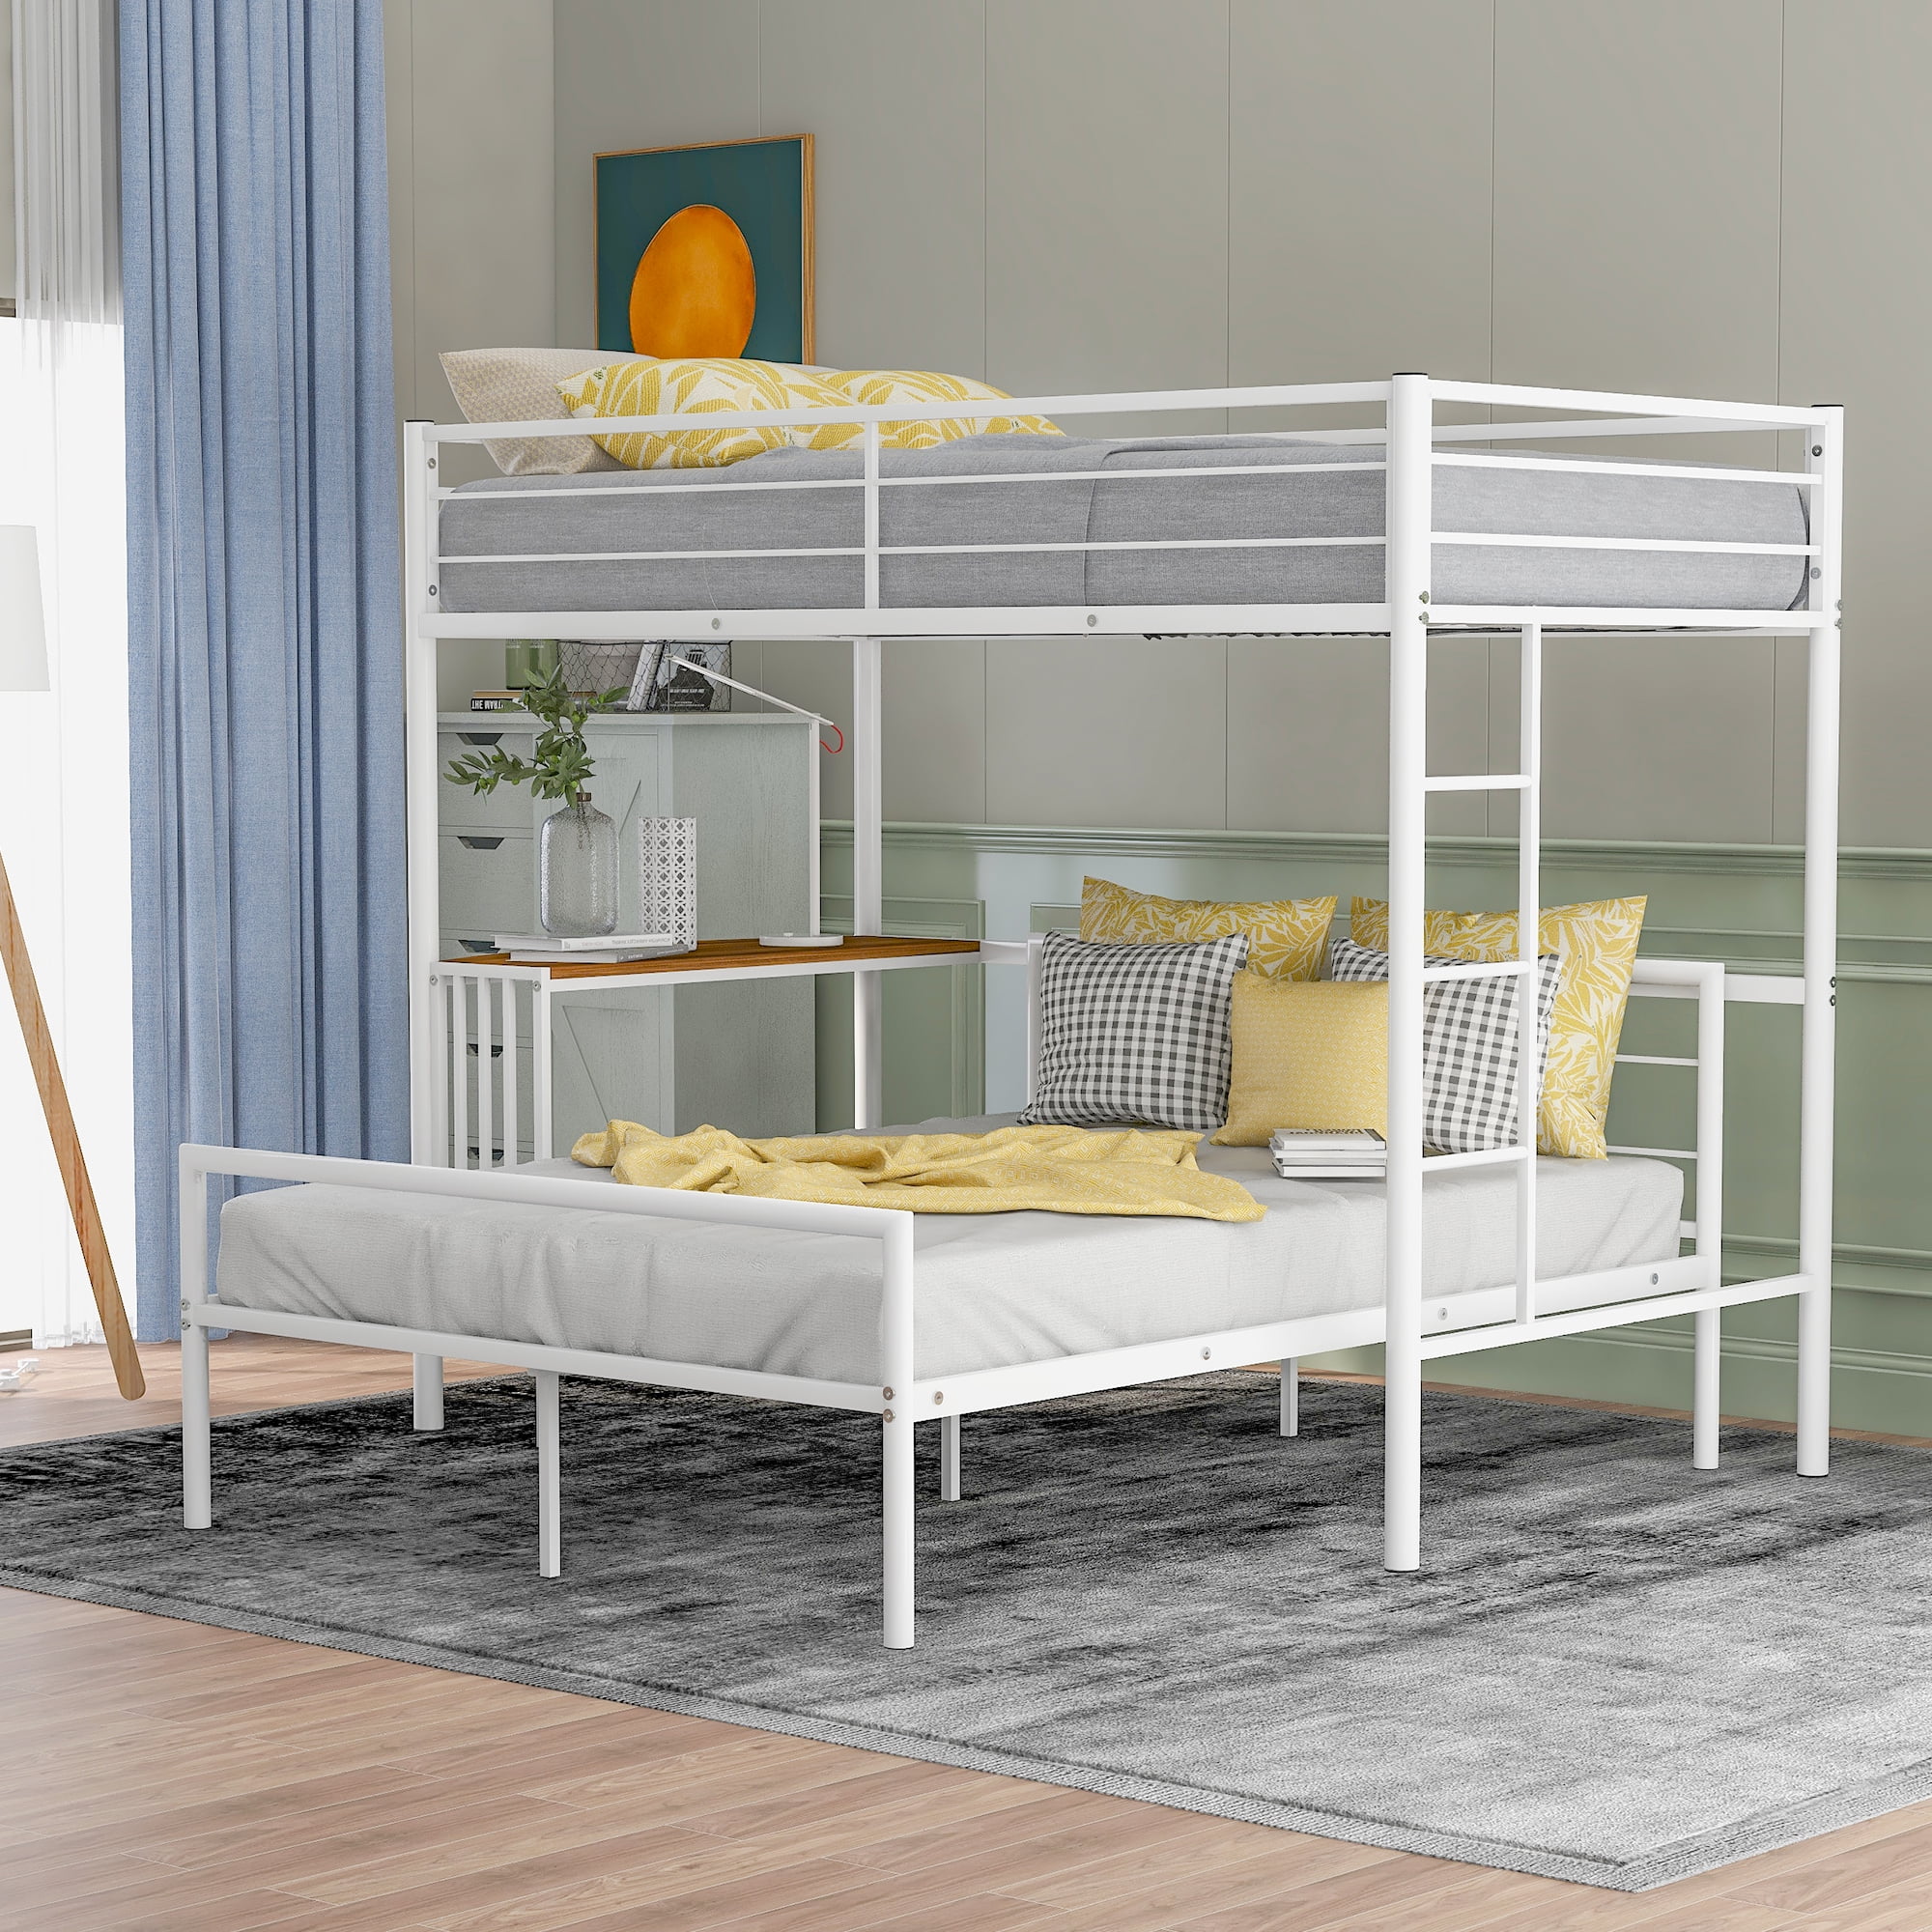 Metal Loft Bed Twin Size And Platform, Full Size Bottom Twin Top Bunk Bed